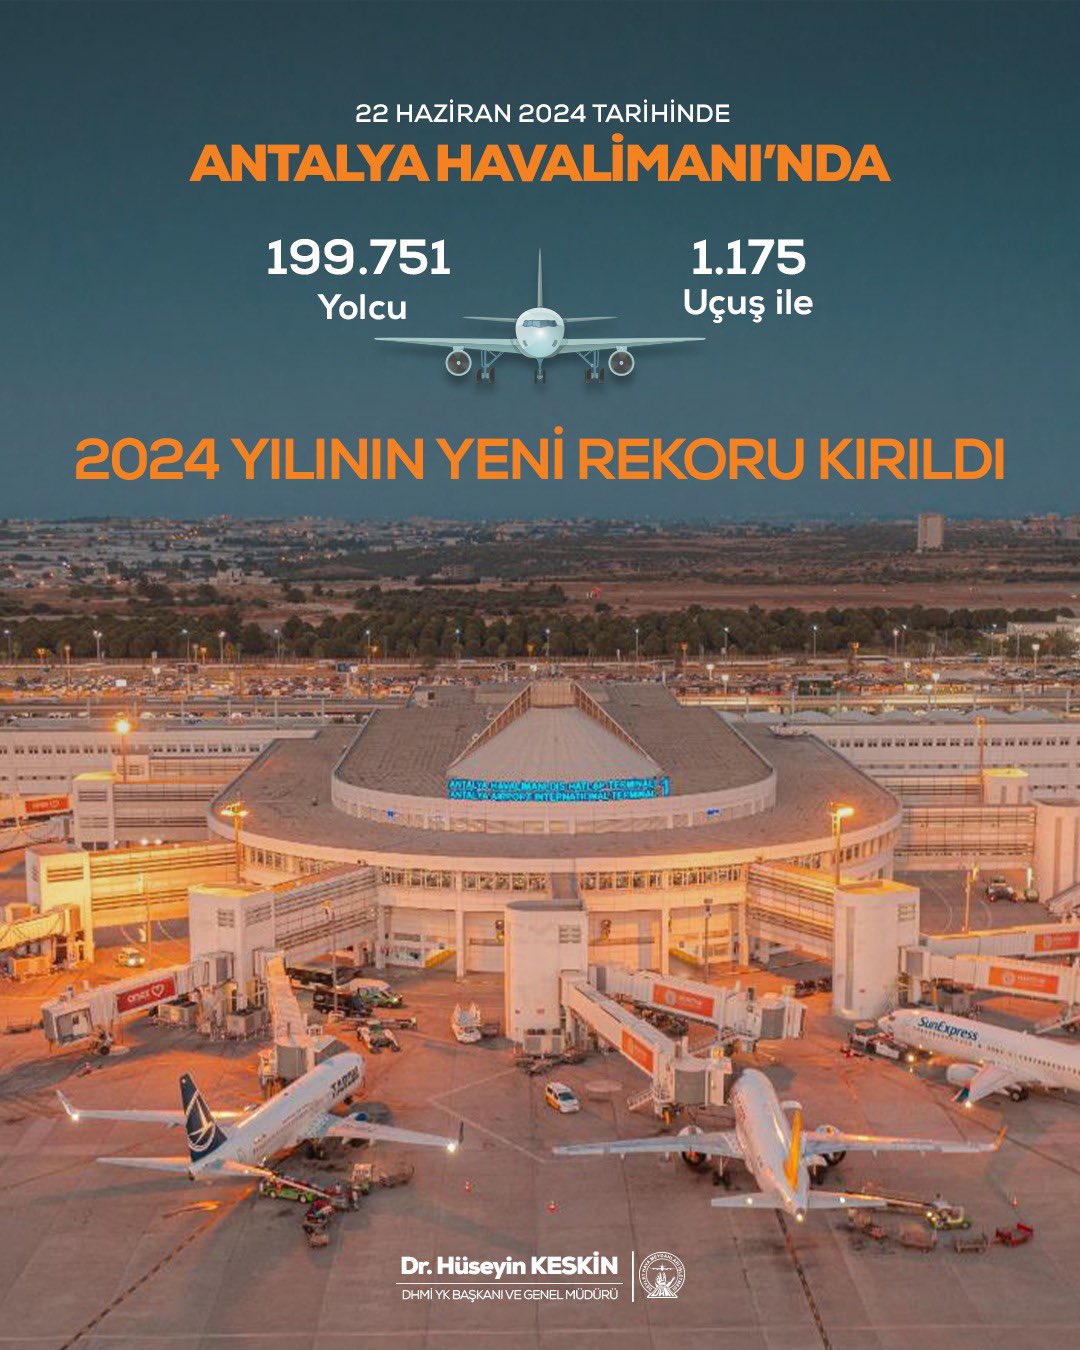 Antalya Airport Sets New Records in Air Traffic and Passenger Numbers 2 Temmuz 2024